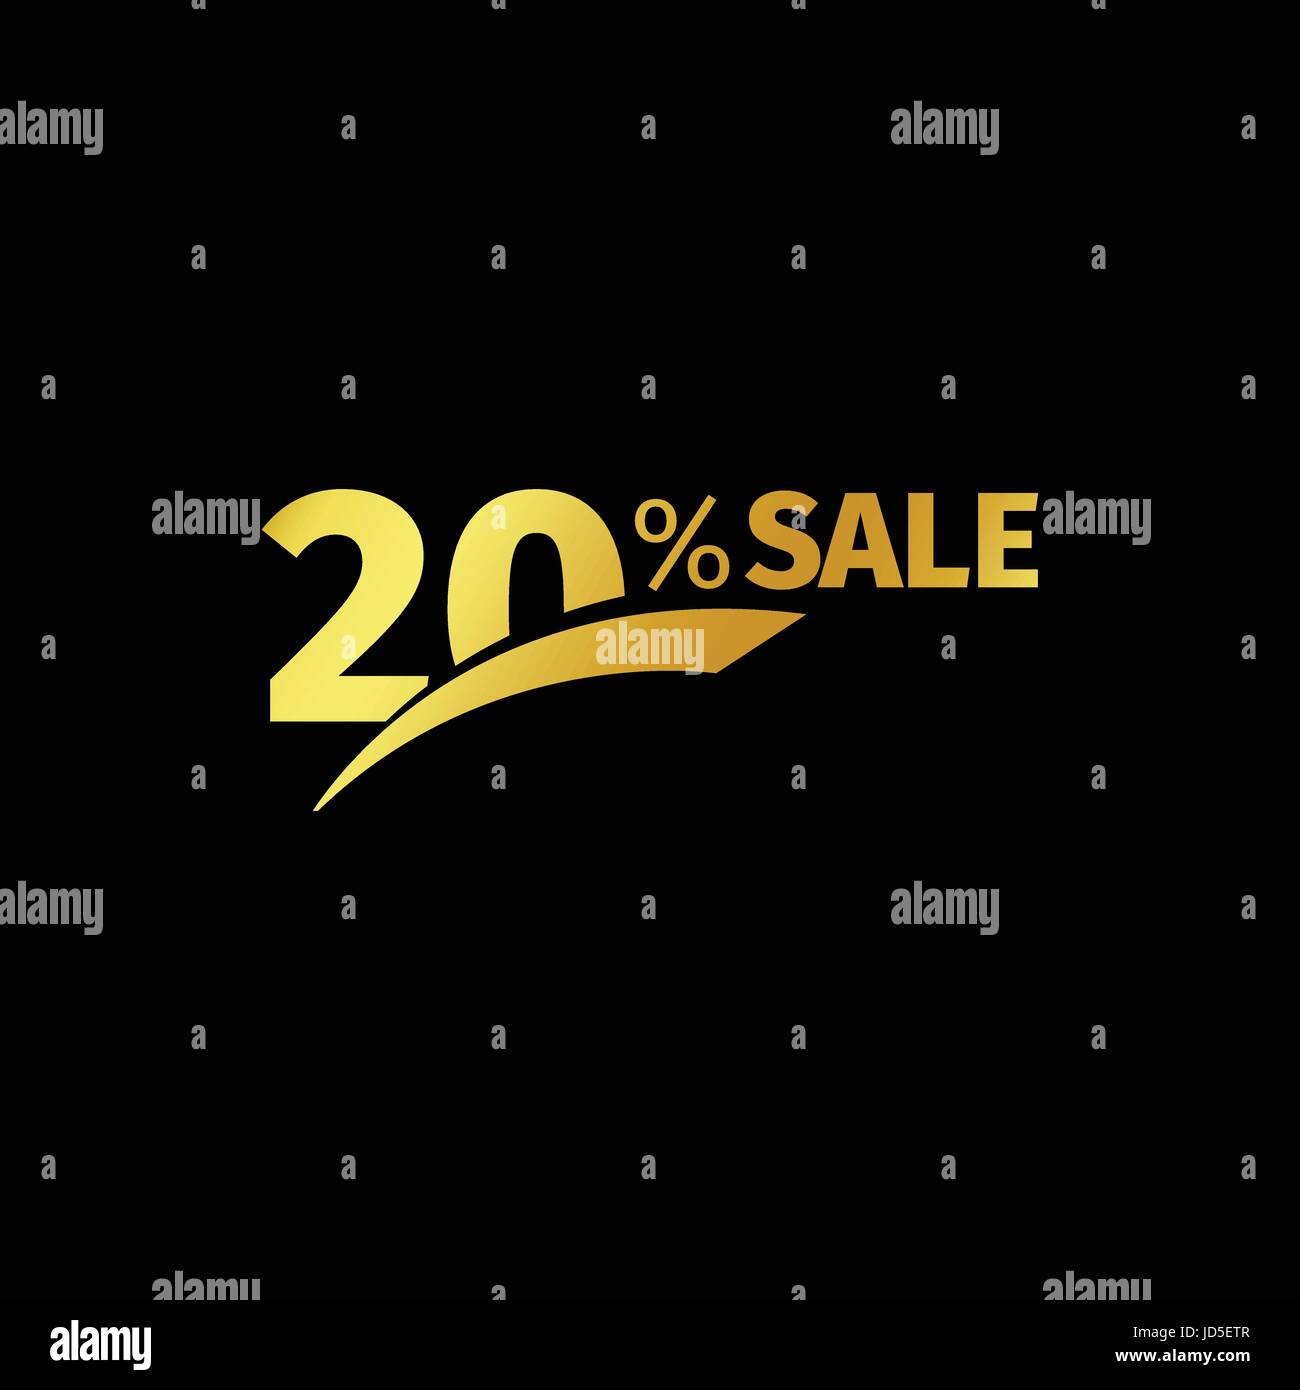 Black banner discount purchase 20 percent sale vector gold logo on a black background. Promotional business offer for buyers logotype. Twenty percenta Stock Vector